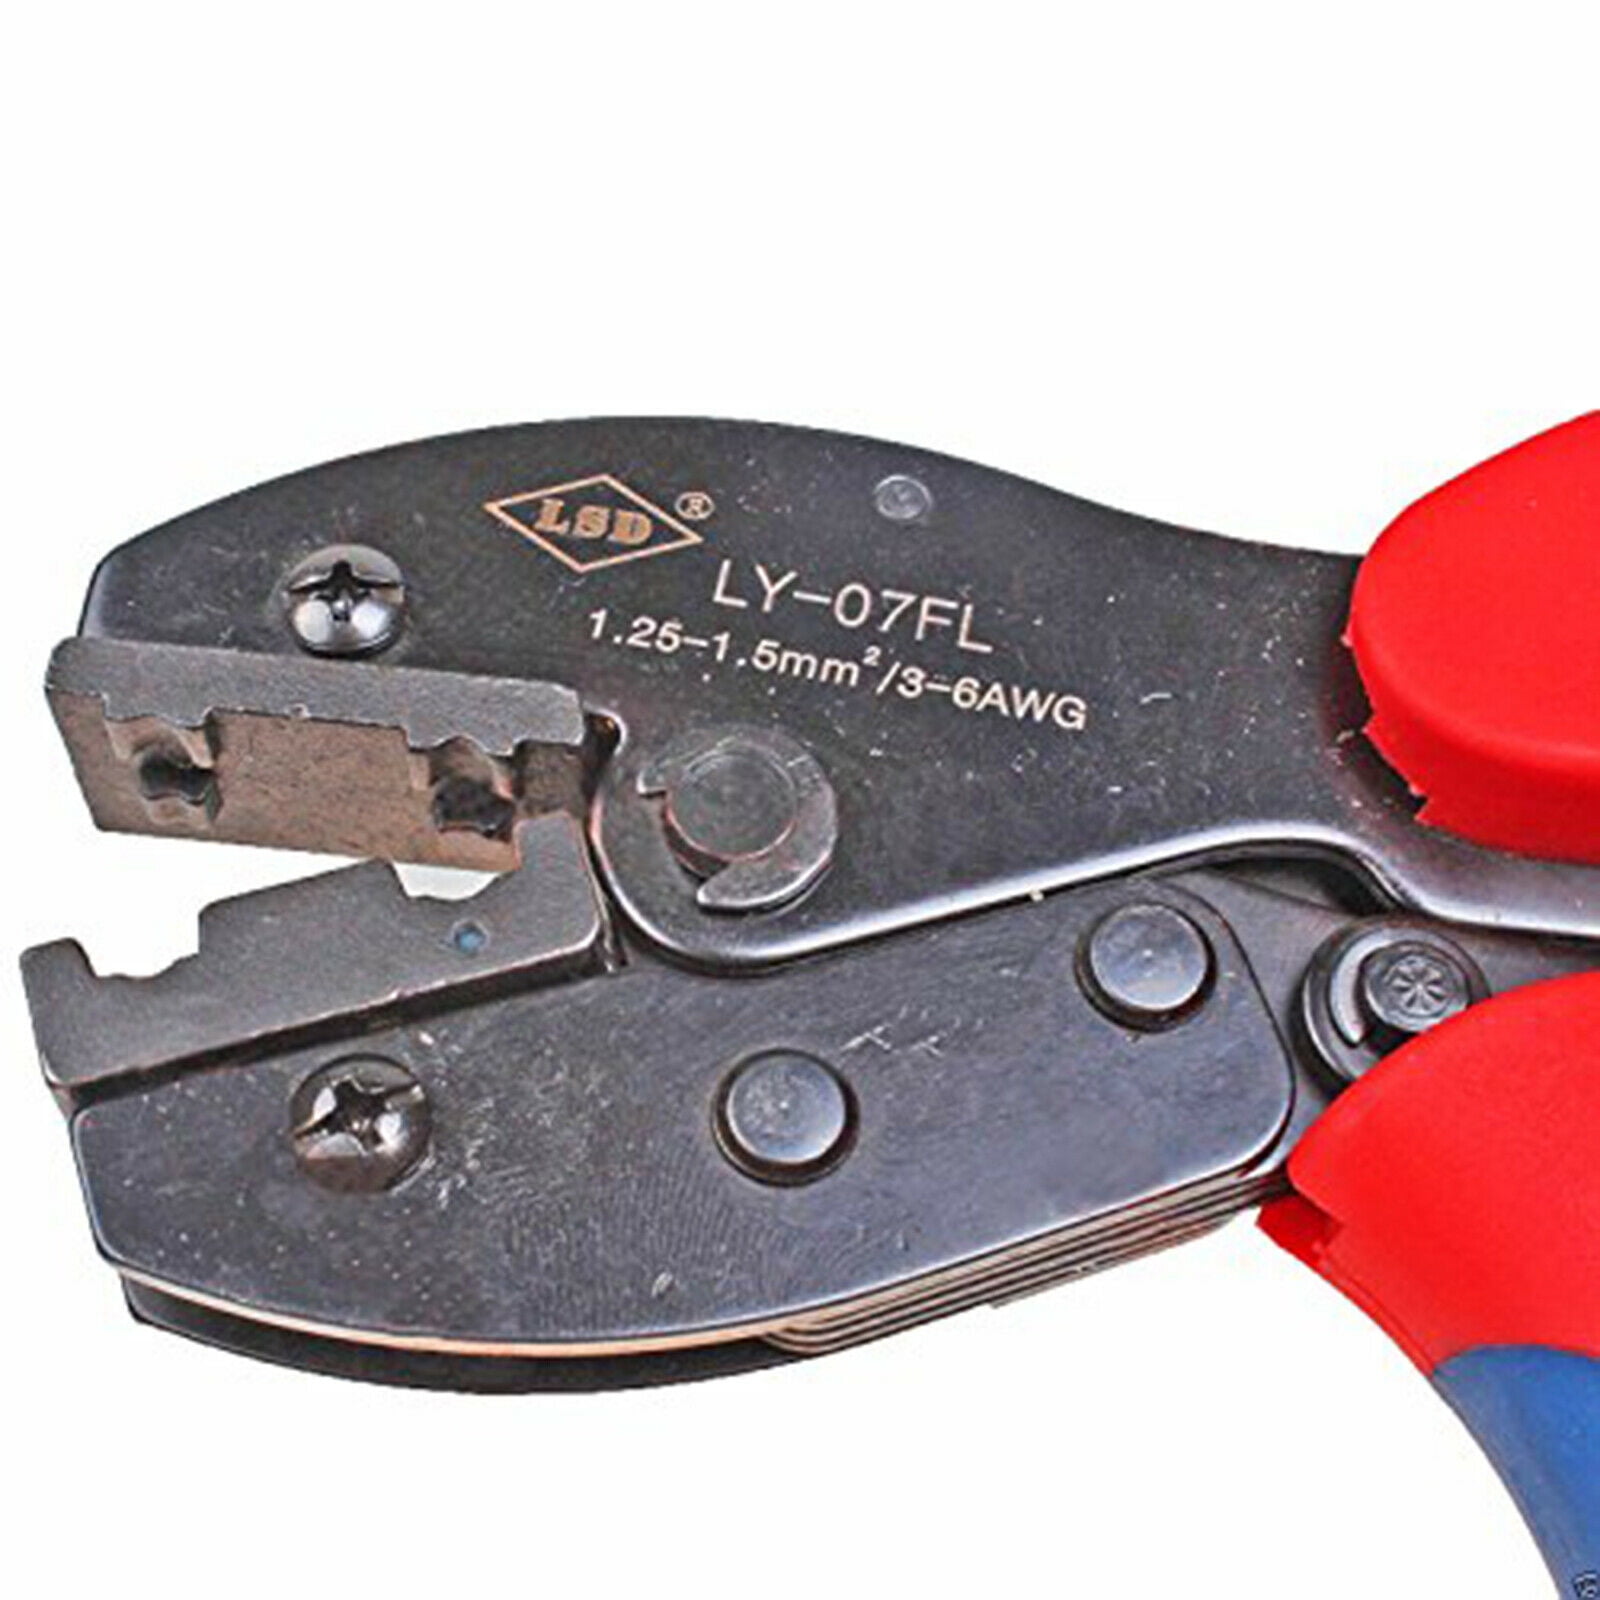 Industrial Grade Ratcheting Crimper Crimping Tool for Flag Right Angle Terminals 